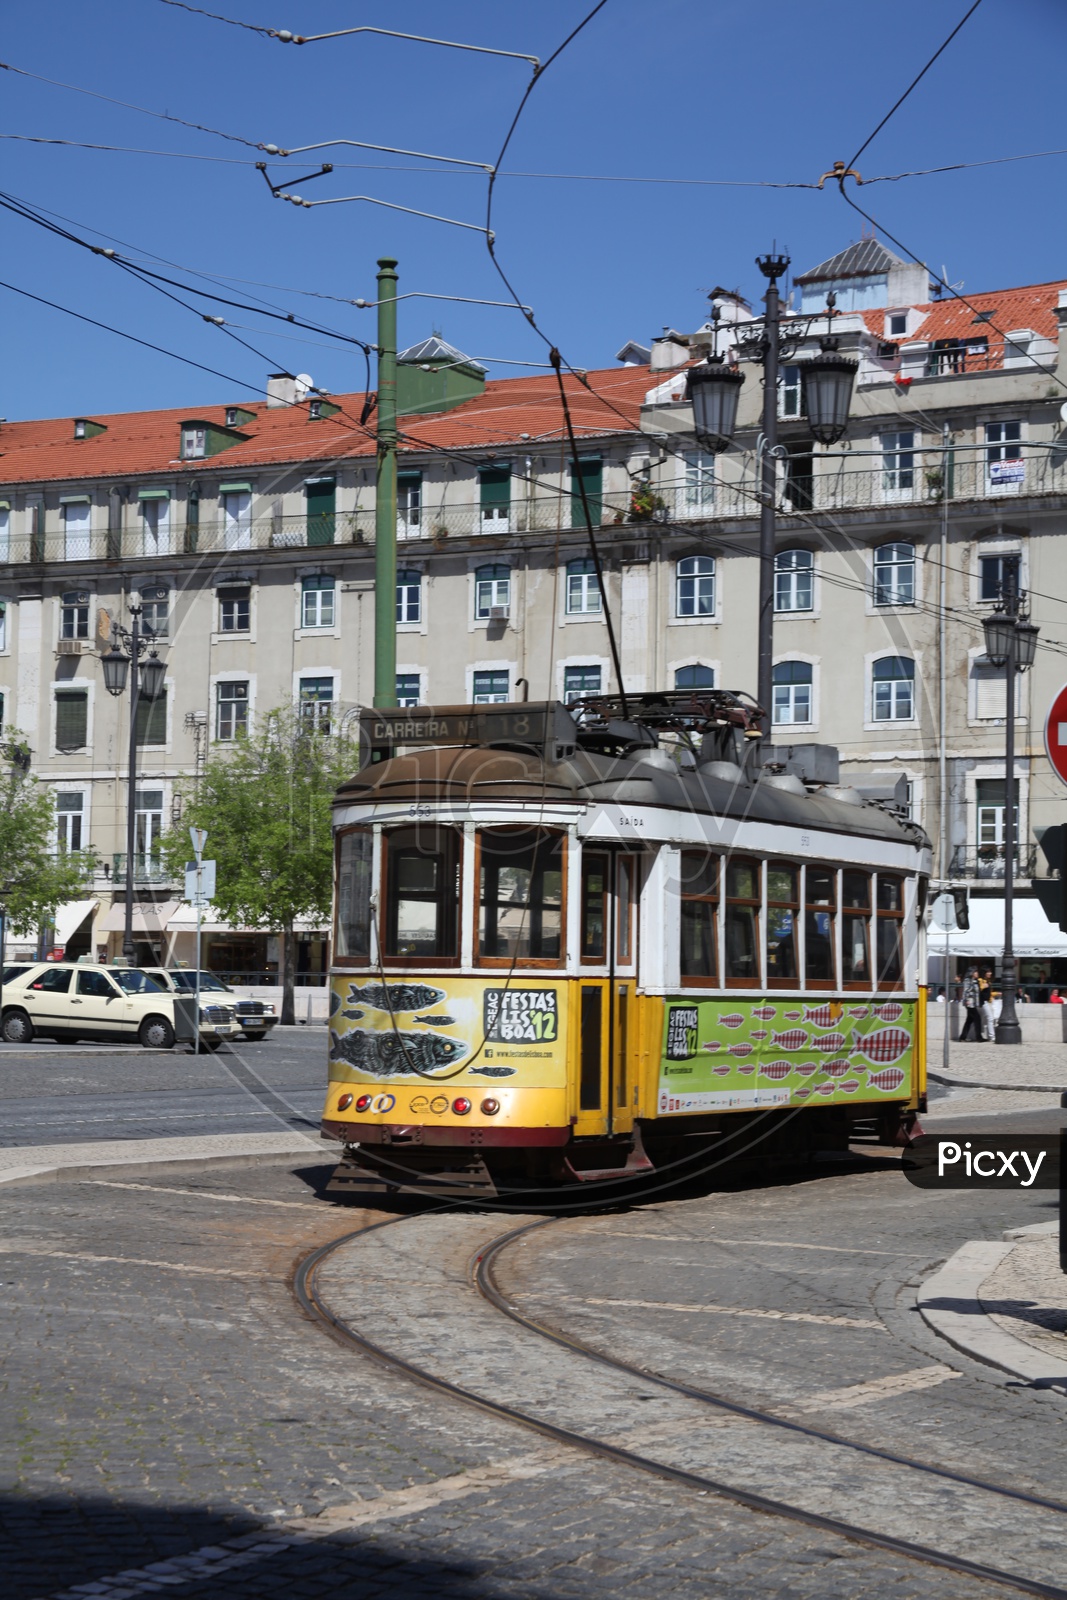 Electric Tram on the road in Lisbon